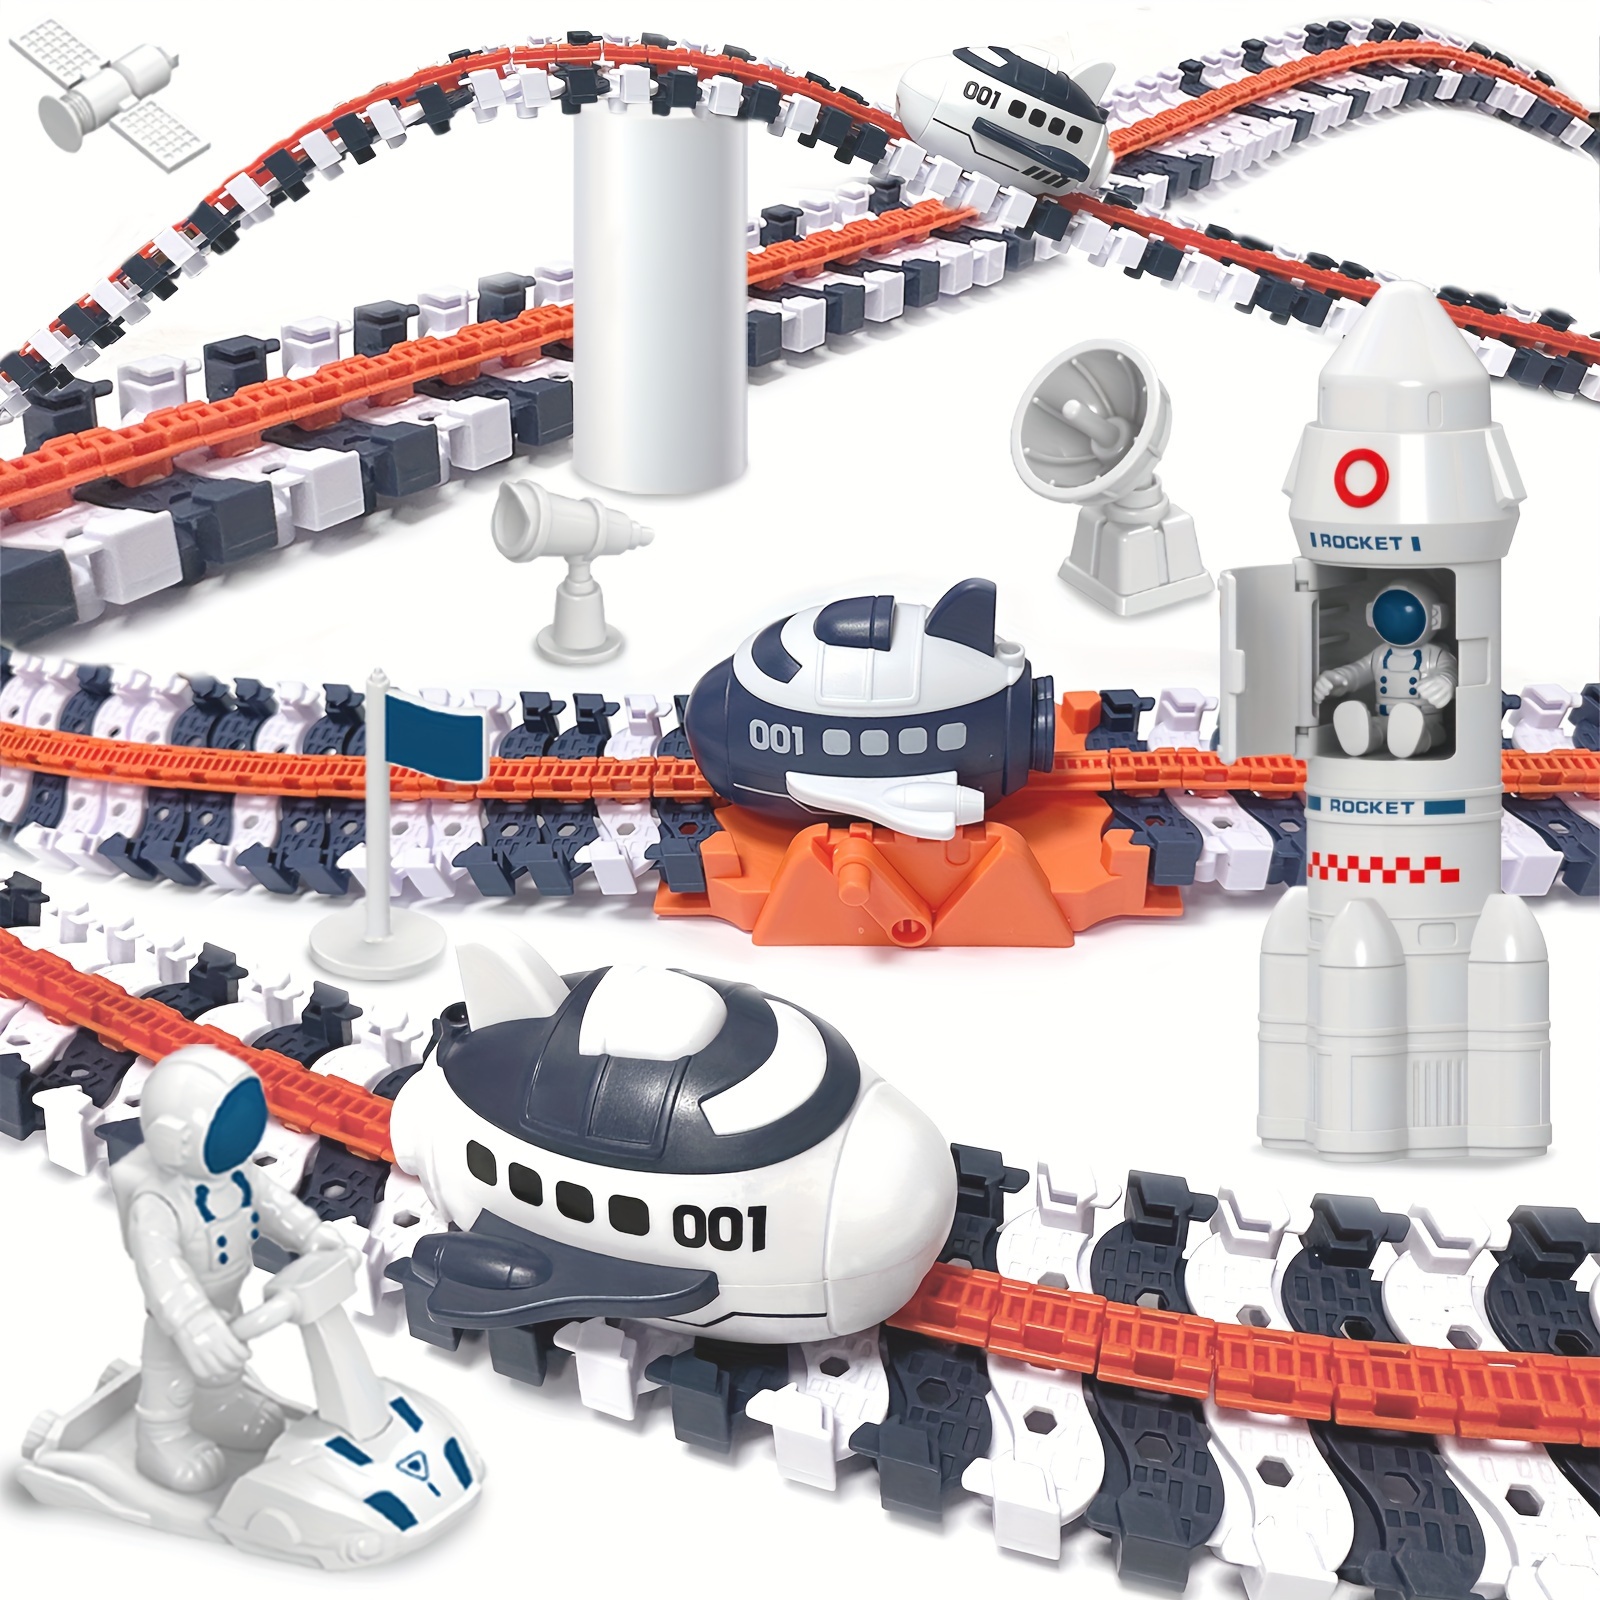 

Creamkids Space Toys 429pcs Create A Space World Road Race Tracks, Flexible Race Track Set With Suction Cups, 2 Rocketship Cars, Educational Playset For 2 3 4 5 6+ Year Old Boys Girls Birthday Gift